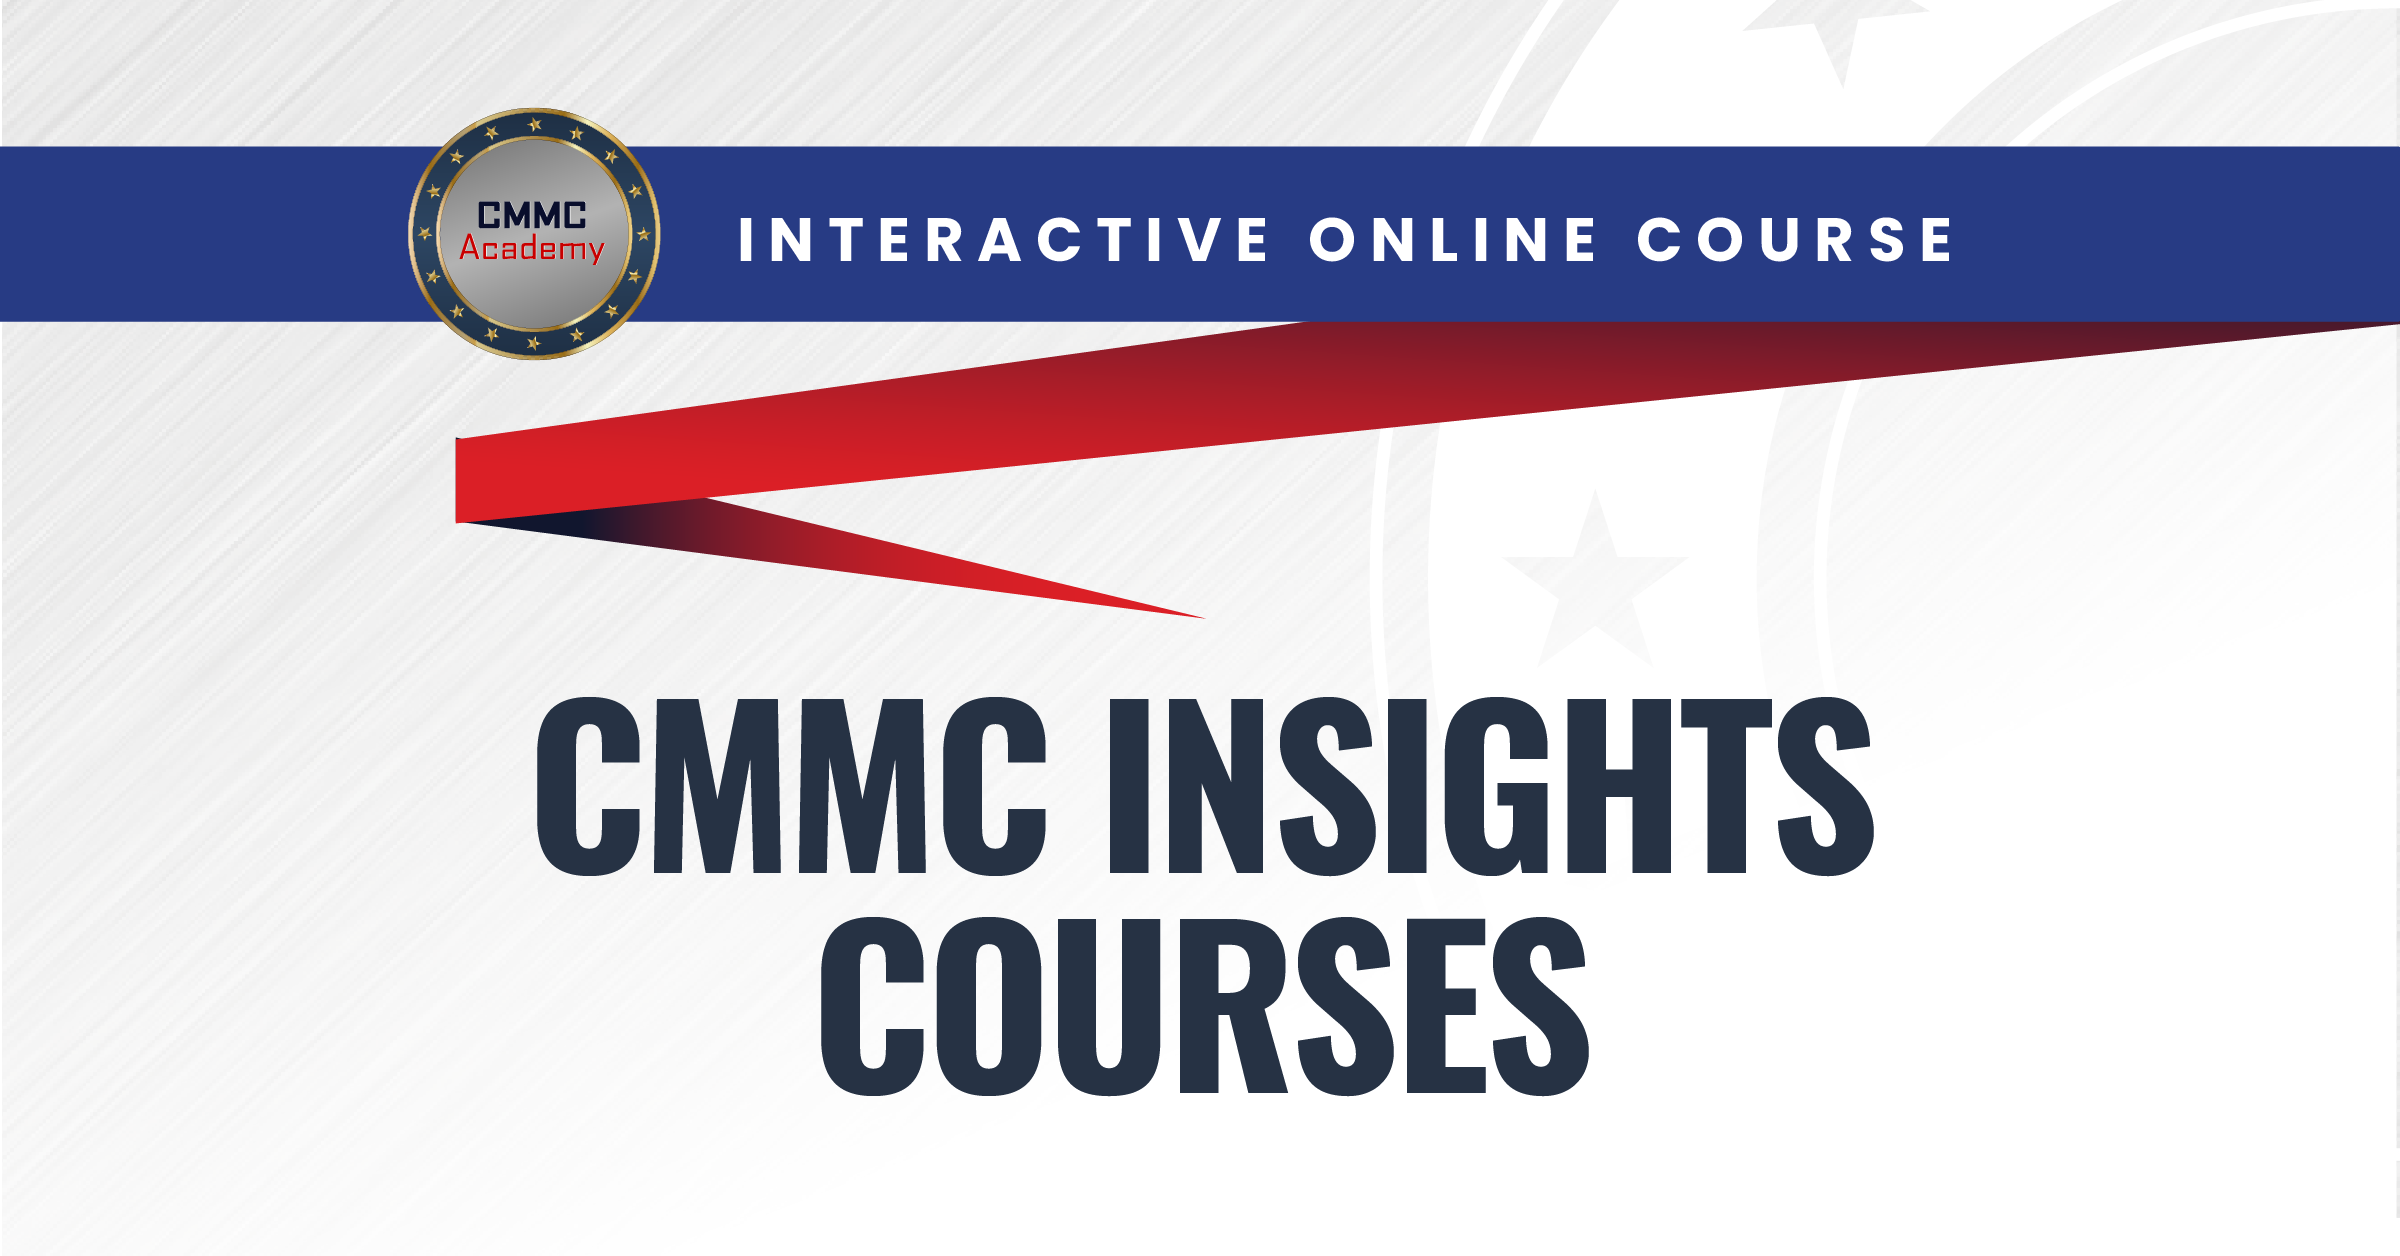 Introducing CMMC Insights Courses